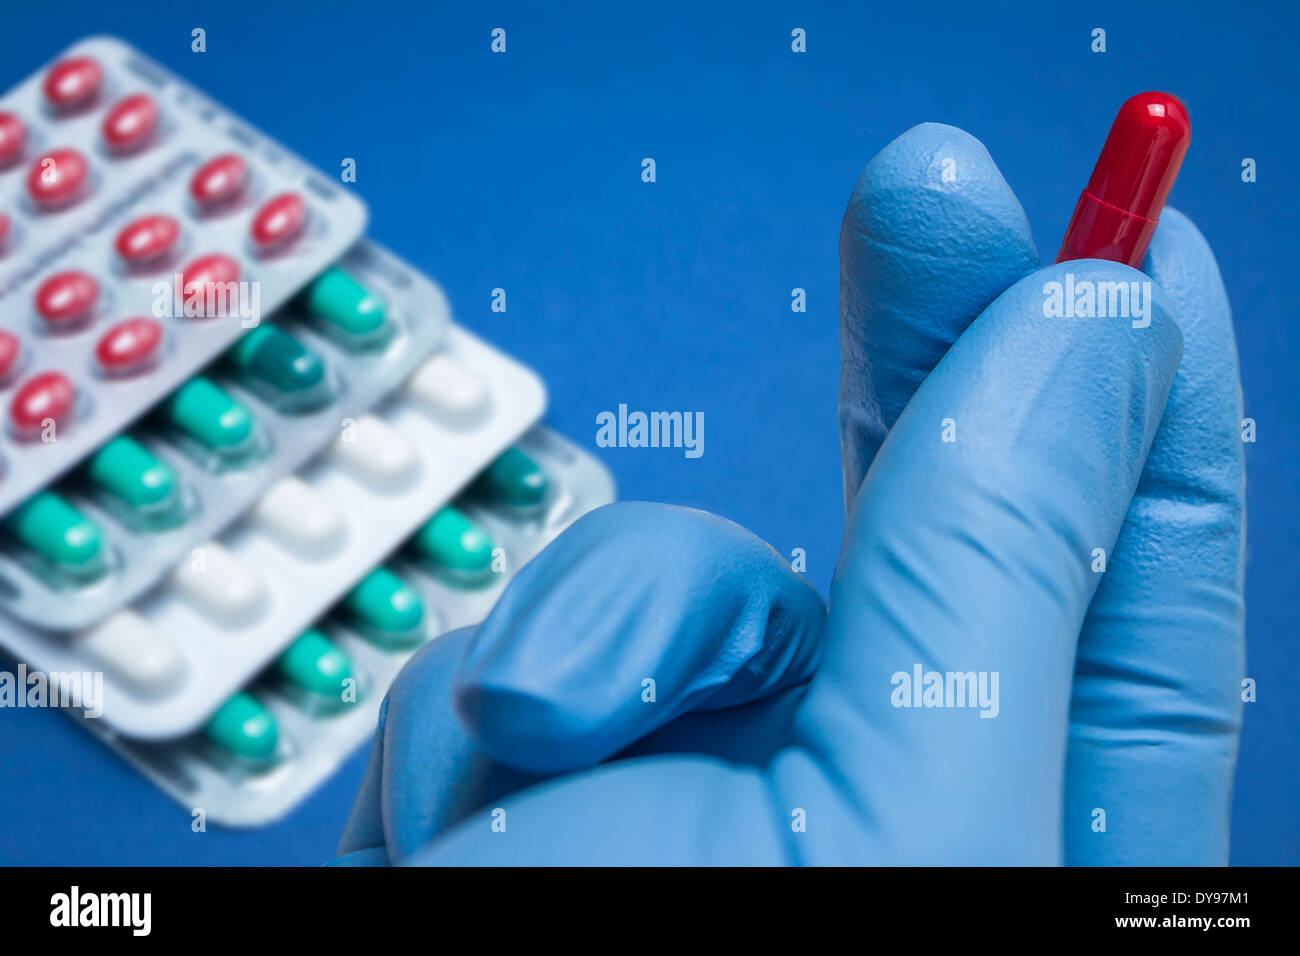 Hand with blue latex glove holds a red capsule Stock Photo